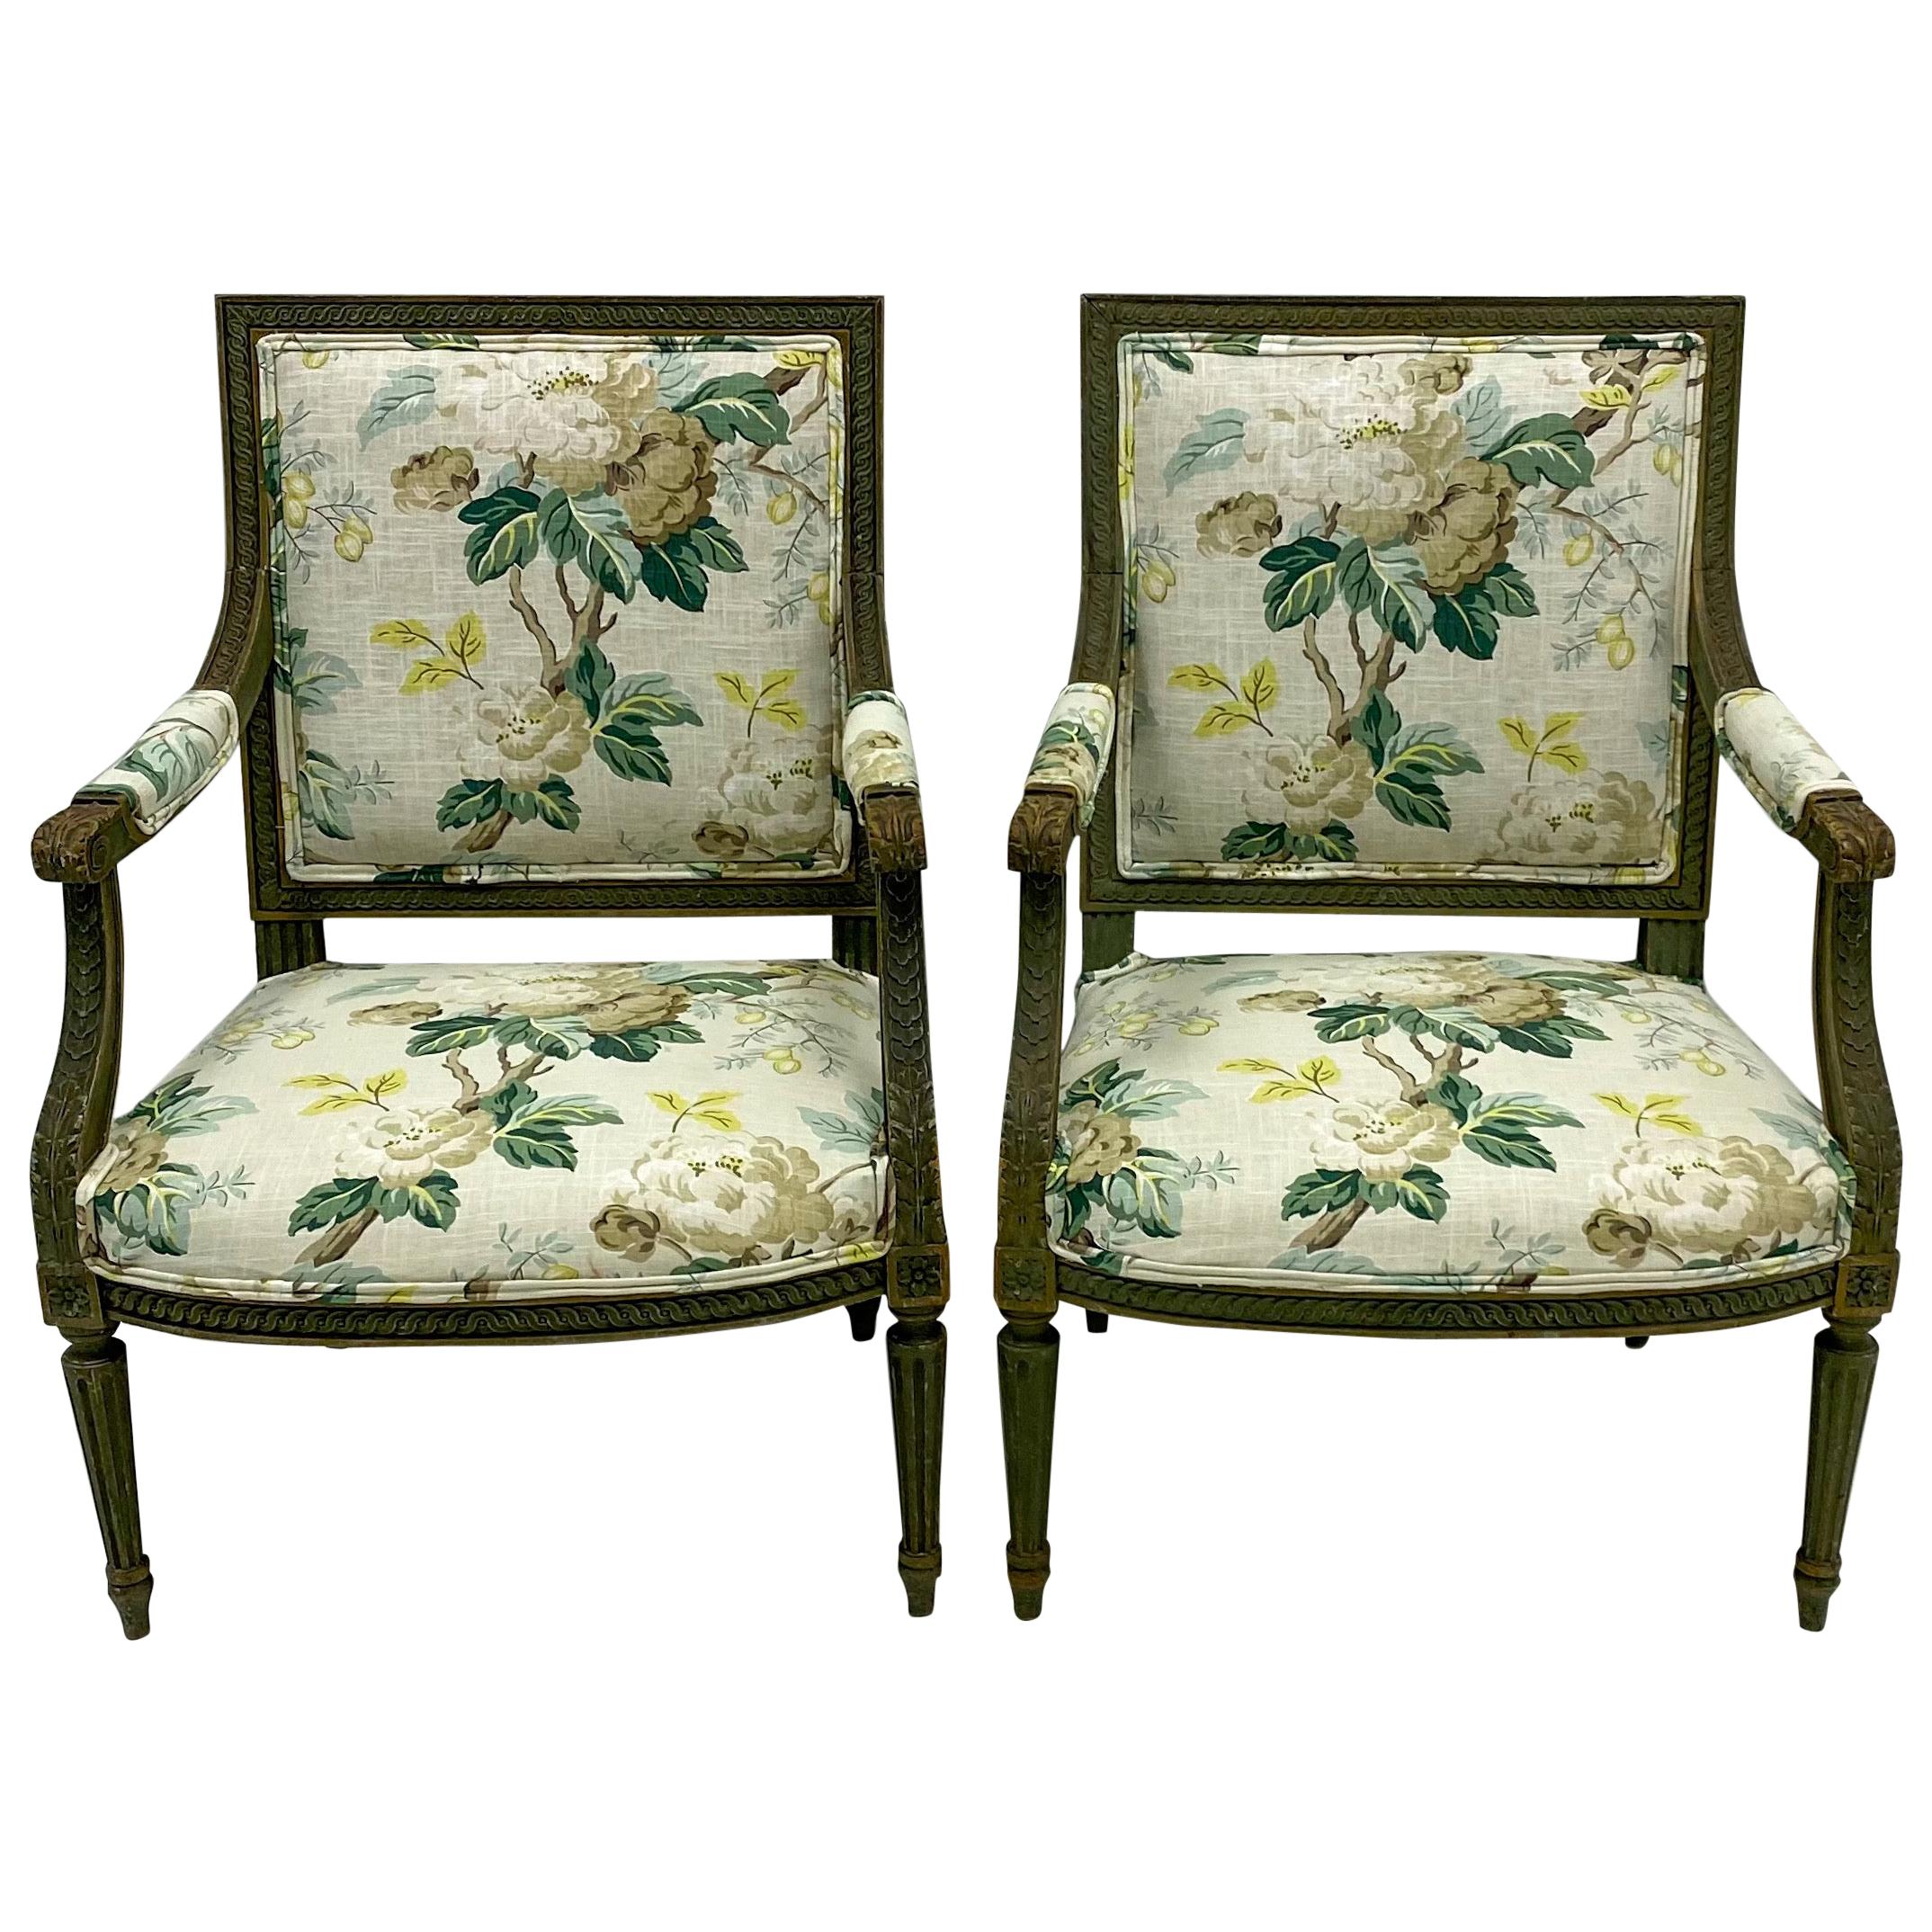 Pair of 19th Century Louis XVI Style Bergère Chairs in Charlotte Moss Linen